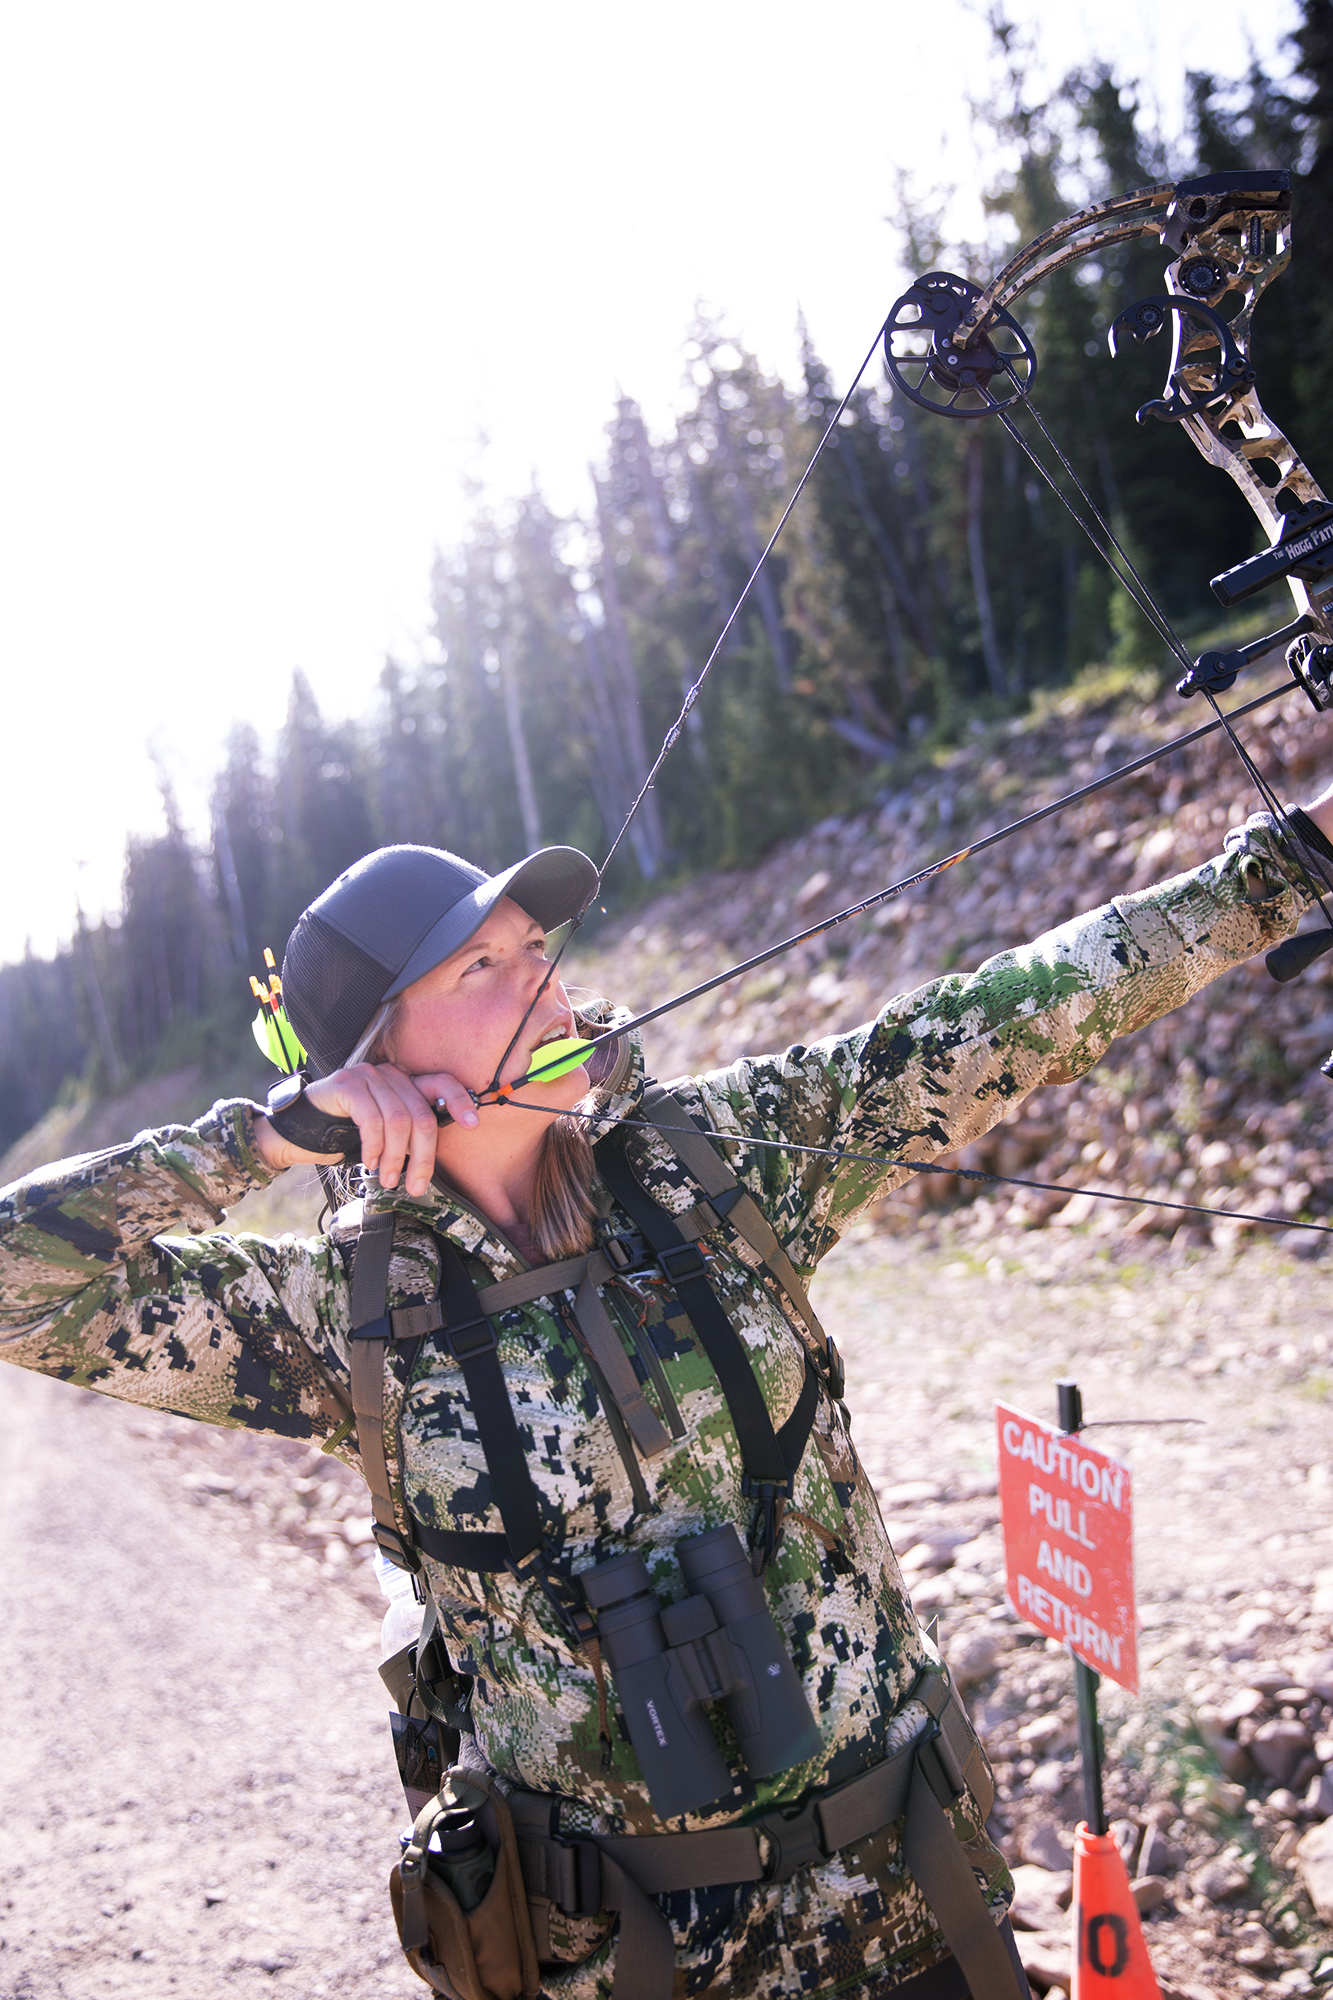 Bowhunting Elk: 7 Last-Minute Efforts That Can Improve Your Chances